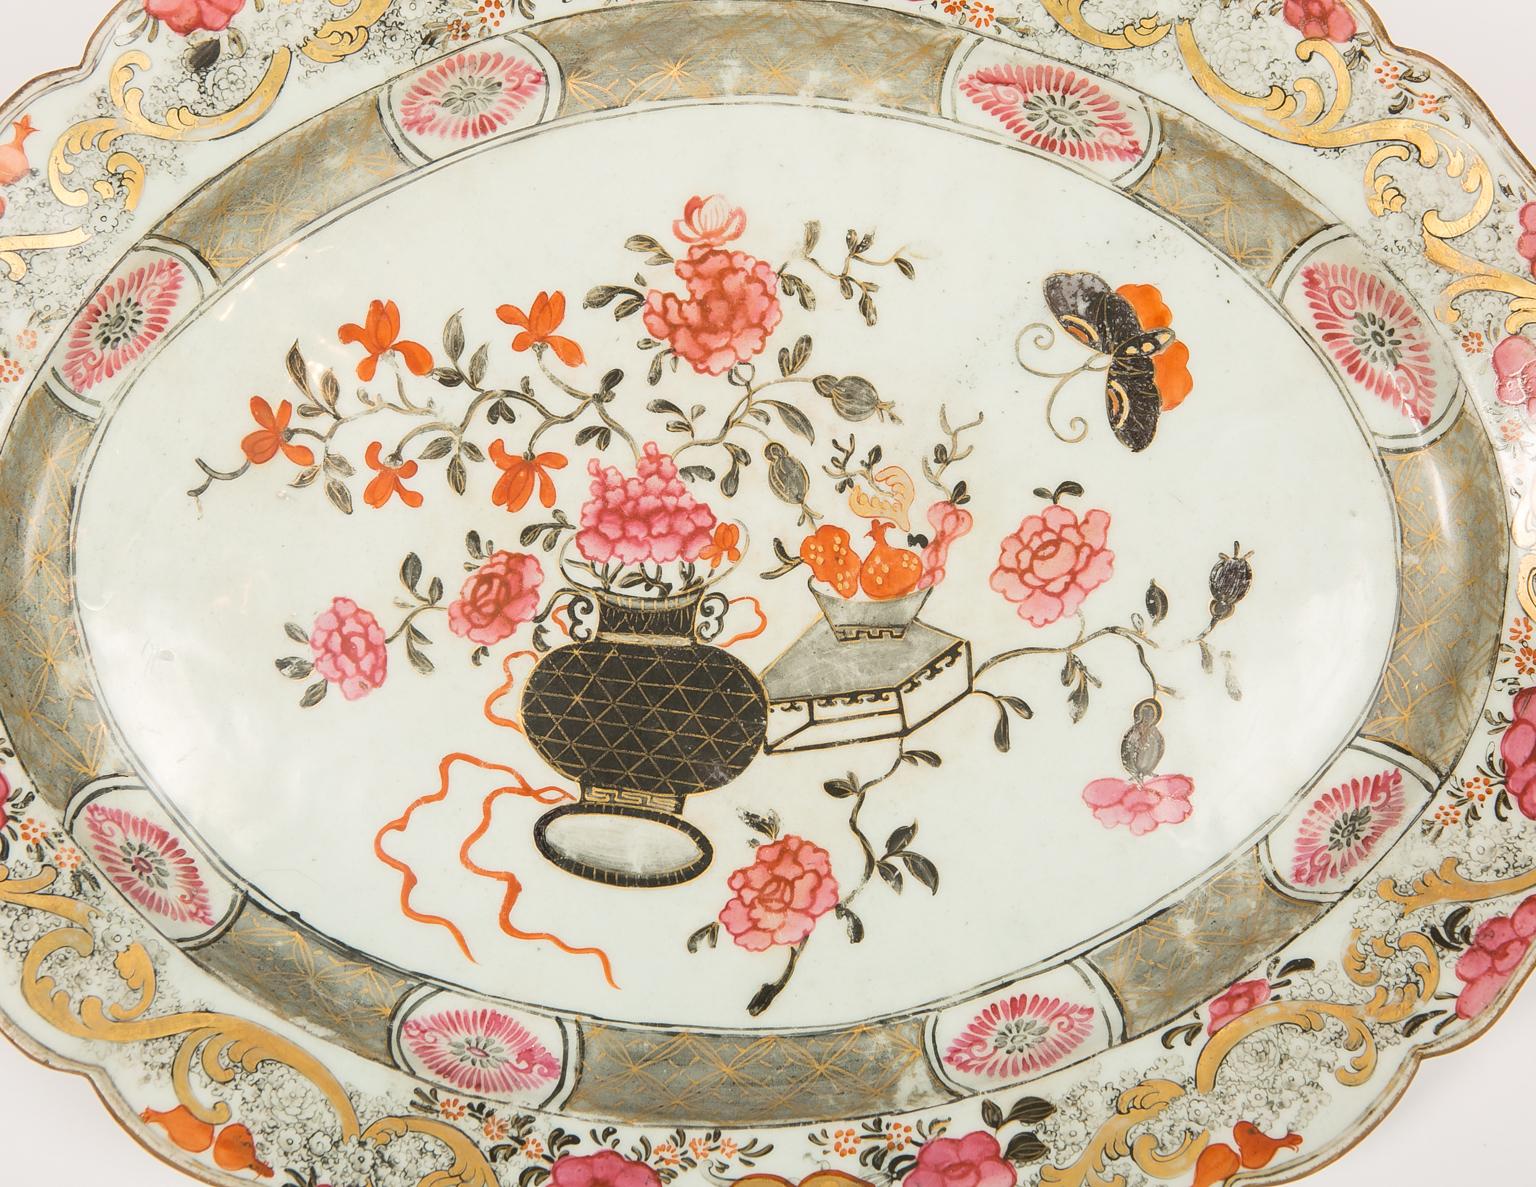 Chinese Export Large Antique Chinese Porcelain Platter Qing Dynasty,  Mid 19th Century